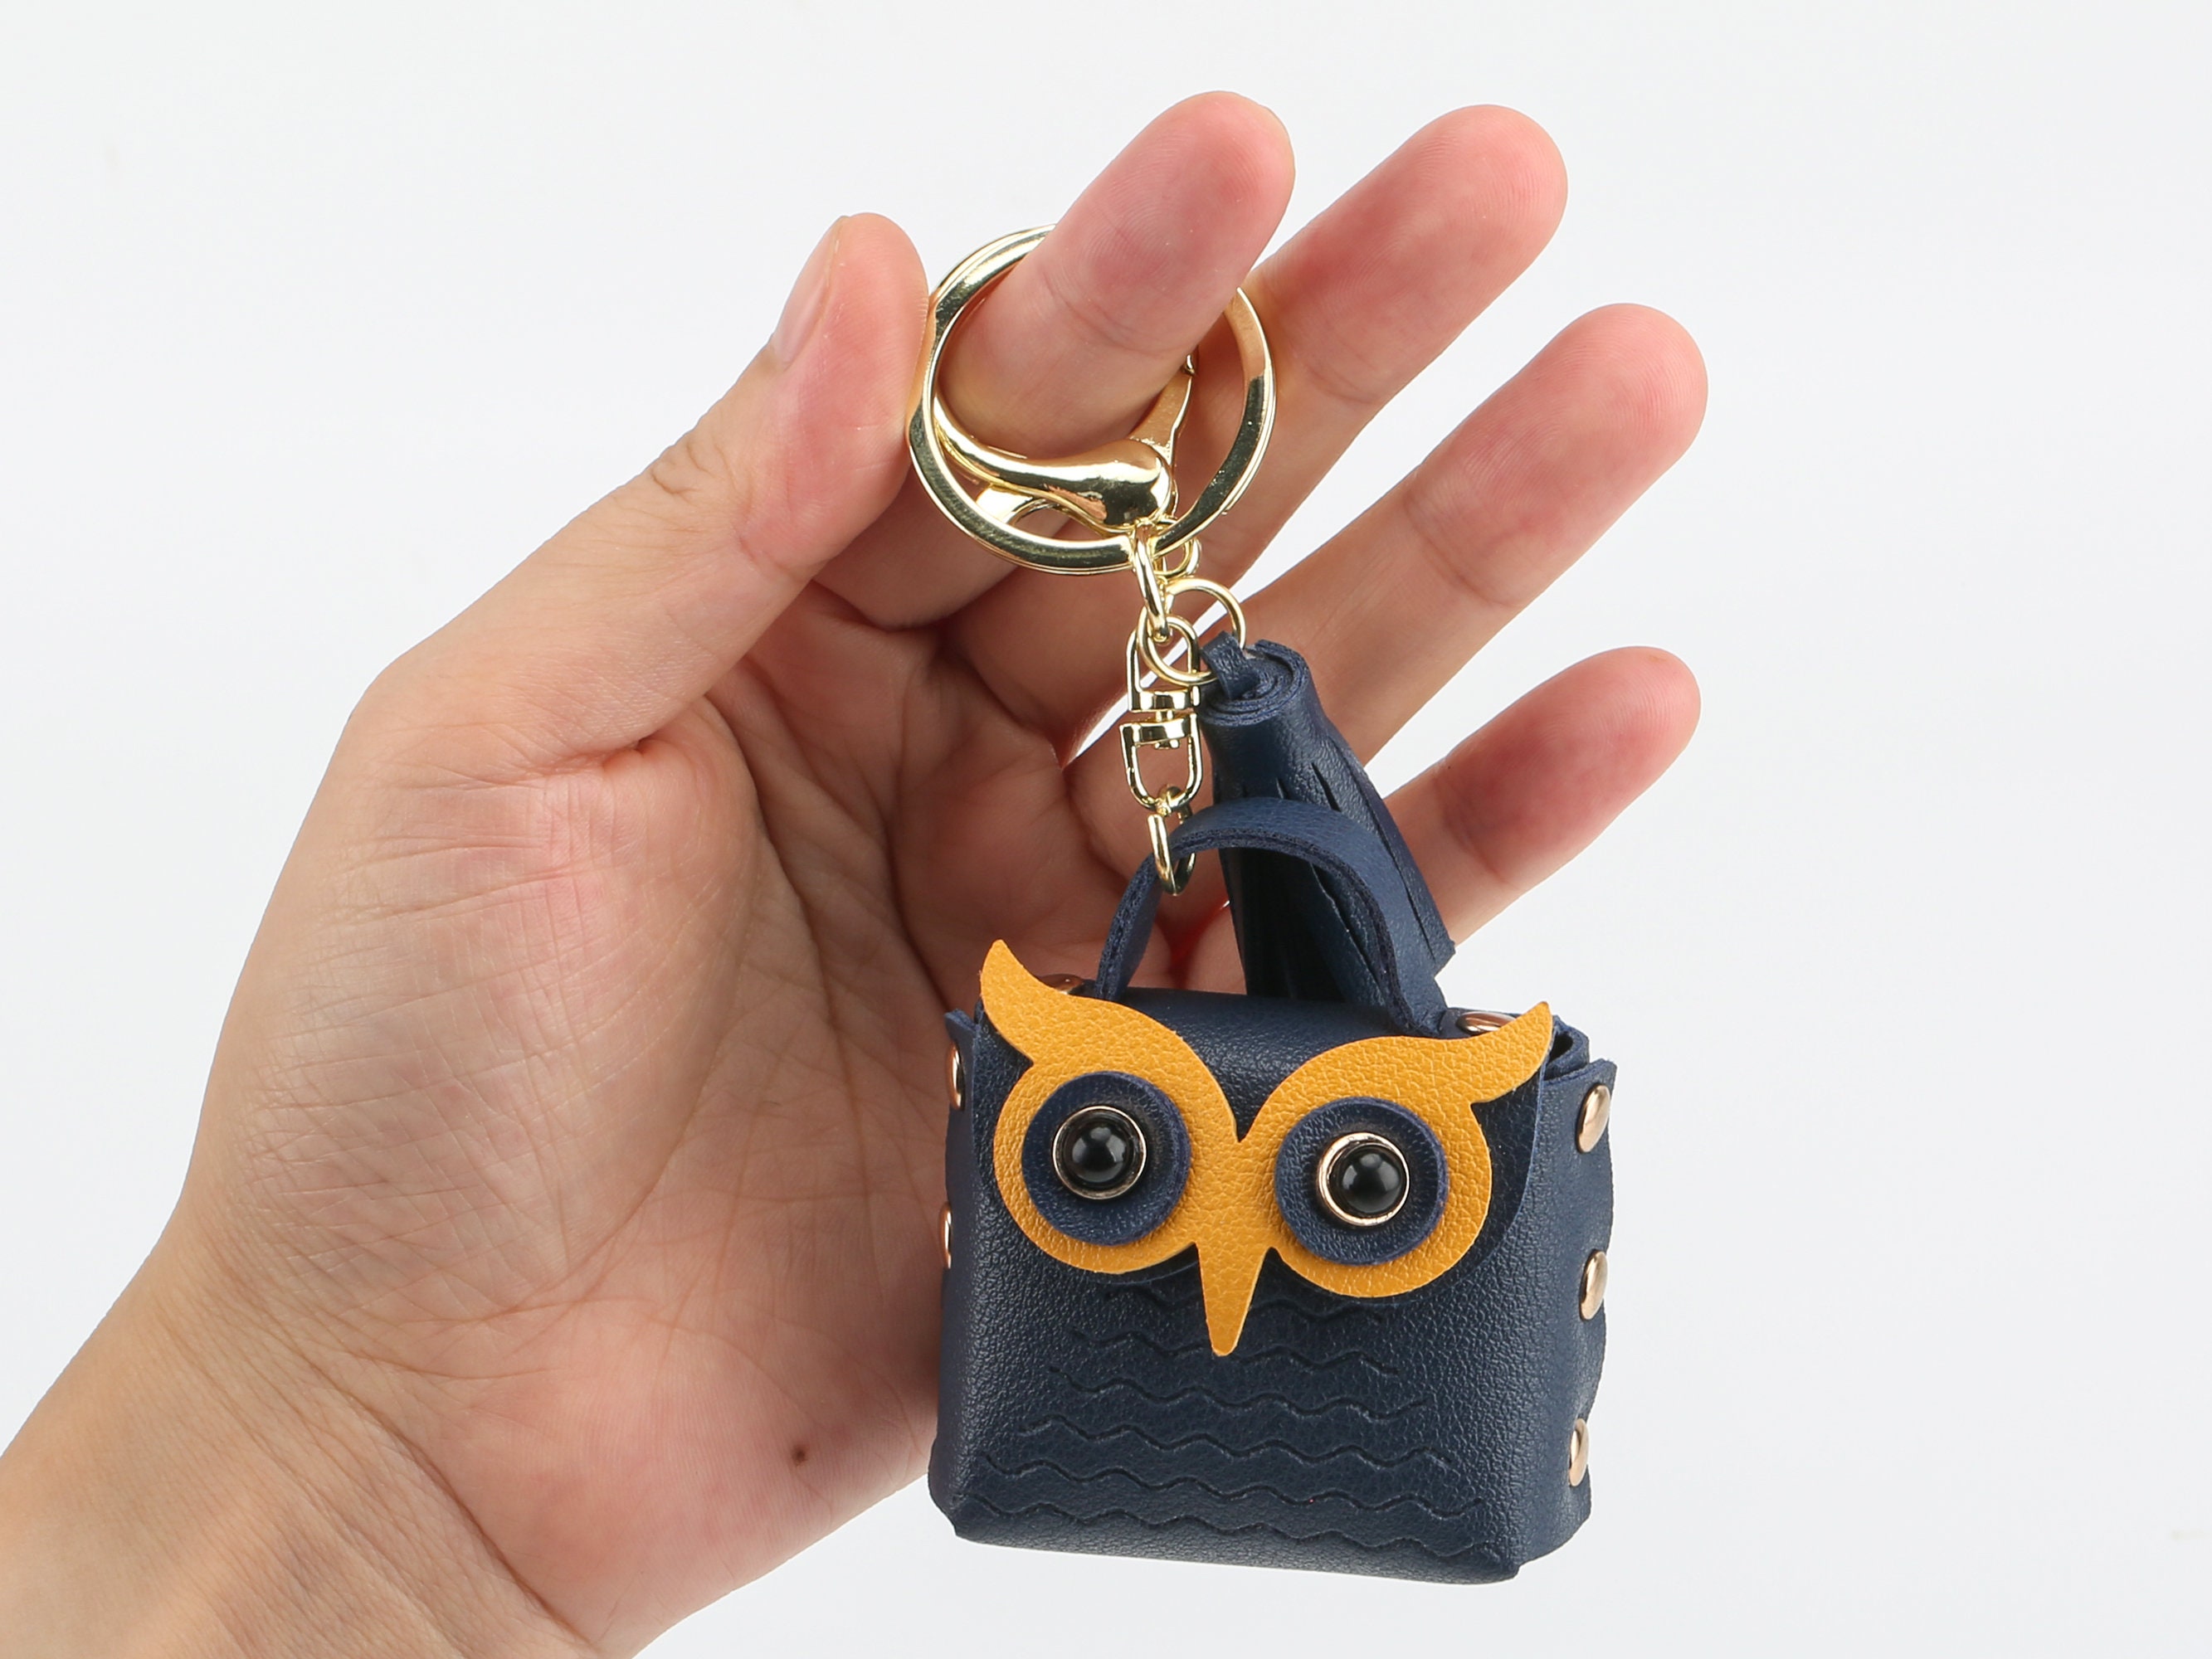 Accessories, Owl Keychain And Mini Coin Pursepouch